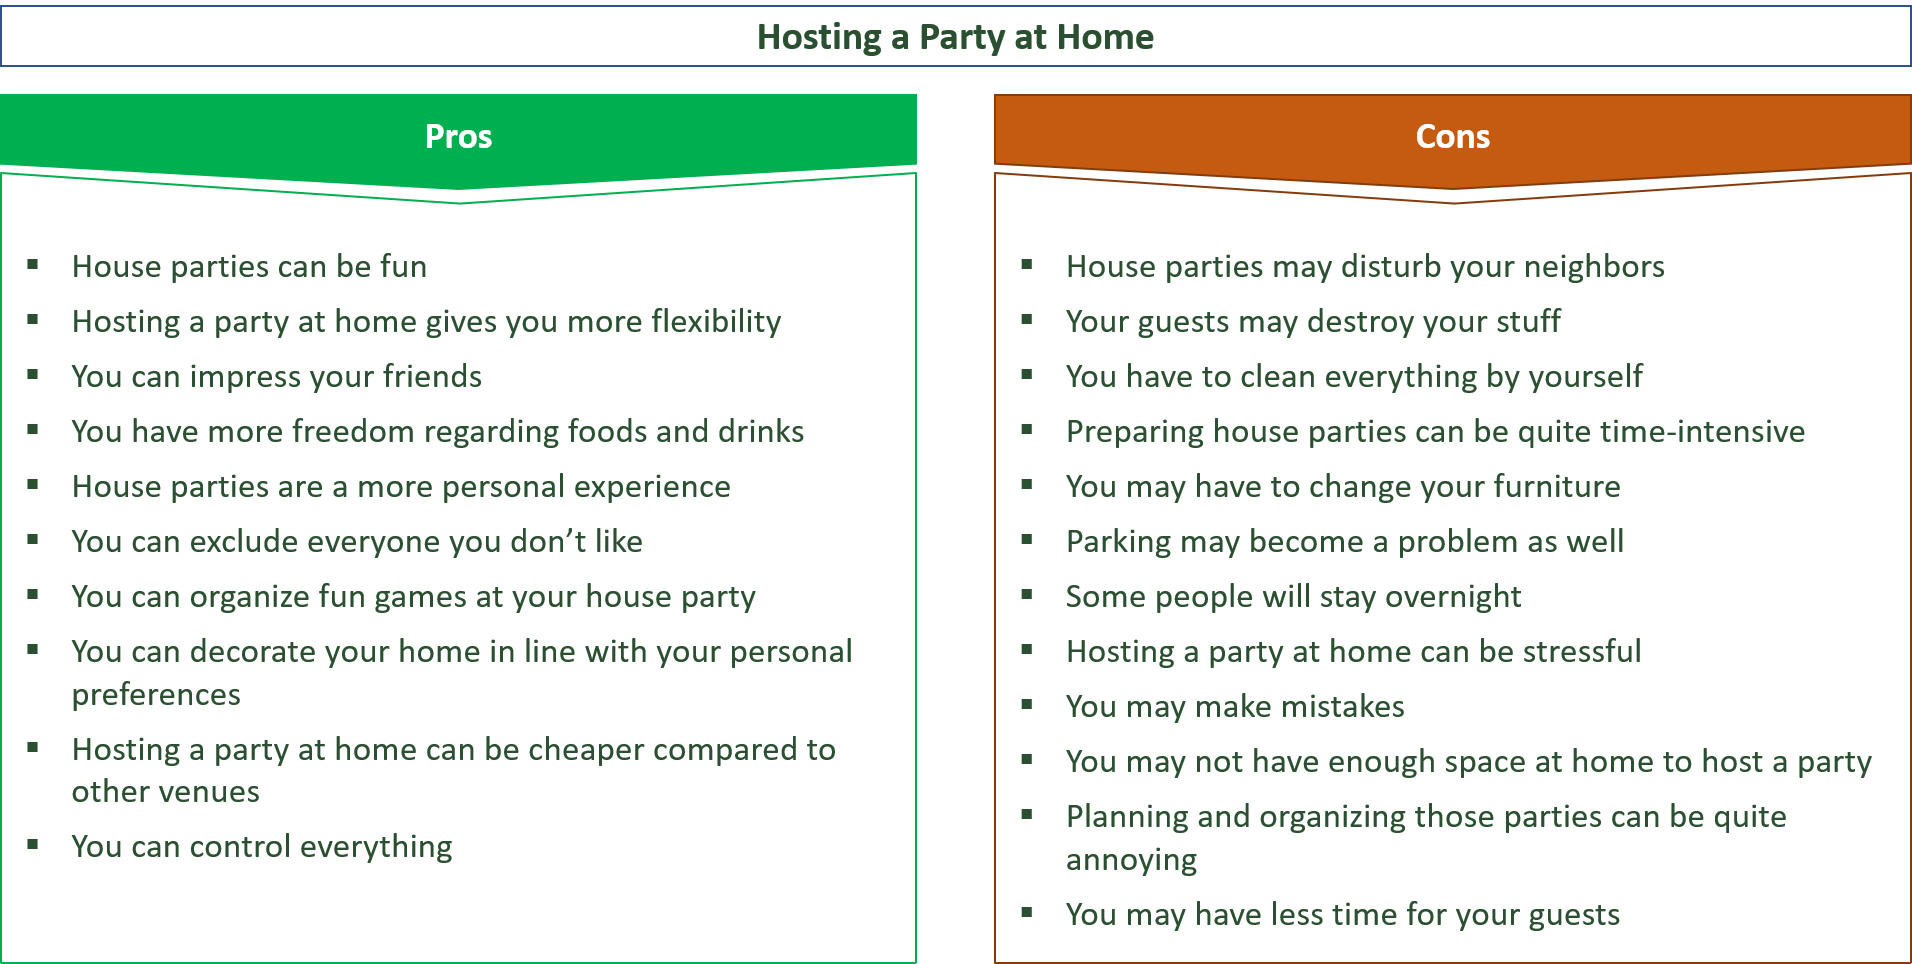 advantages and disadvantages of hosting a party at home vs. party in venues